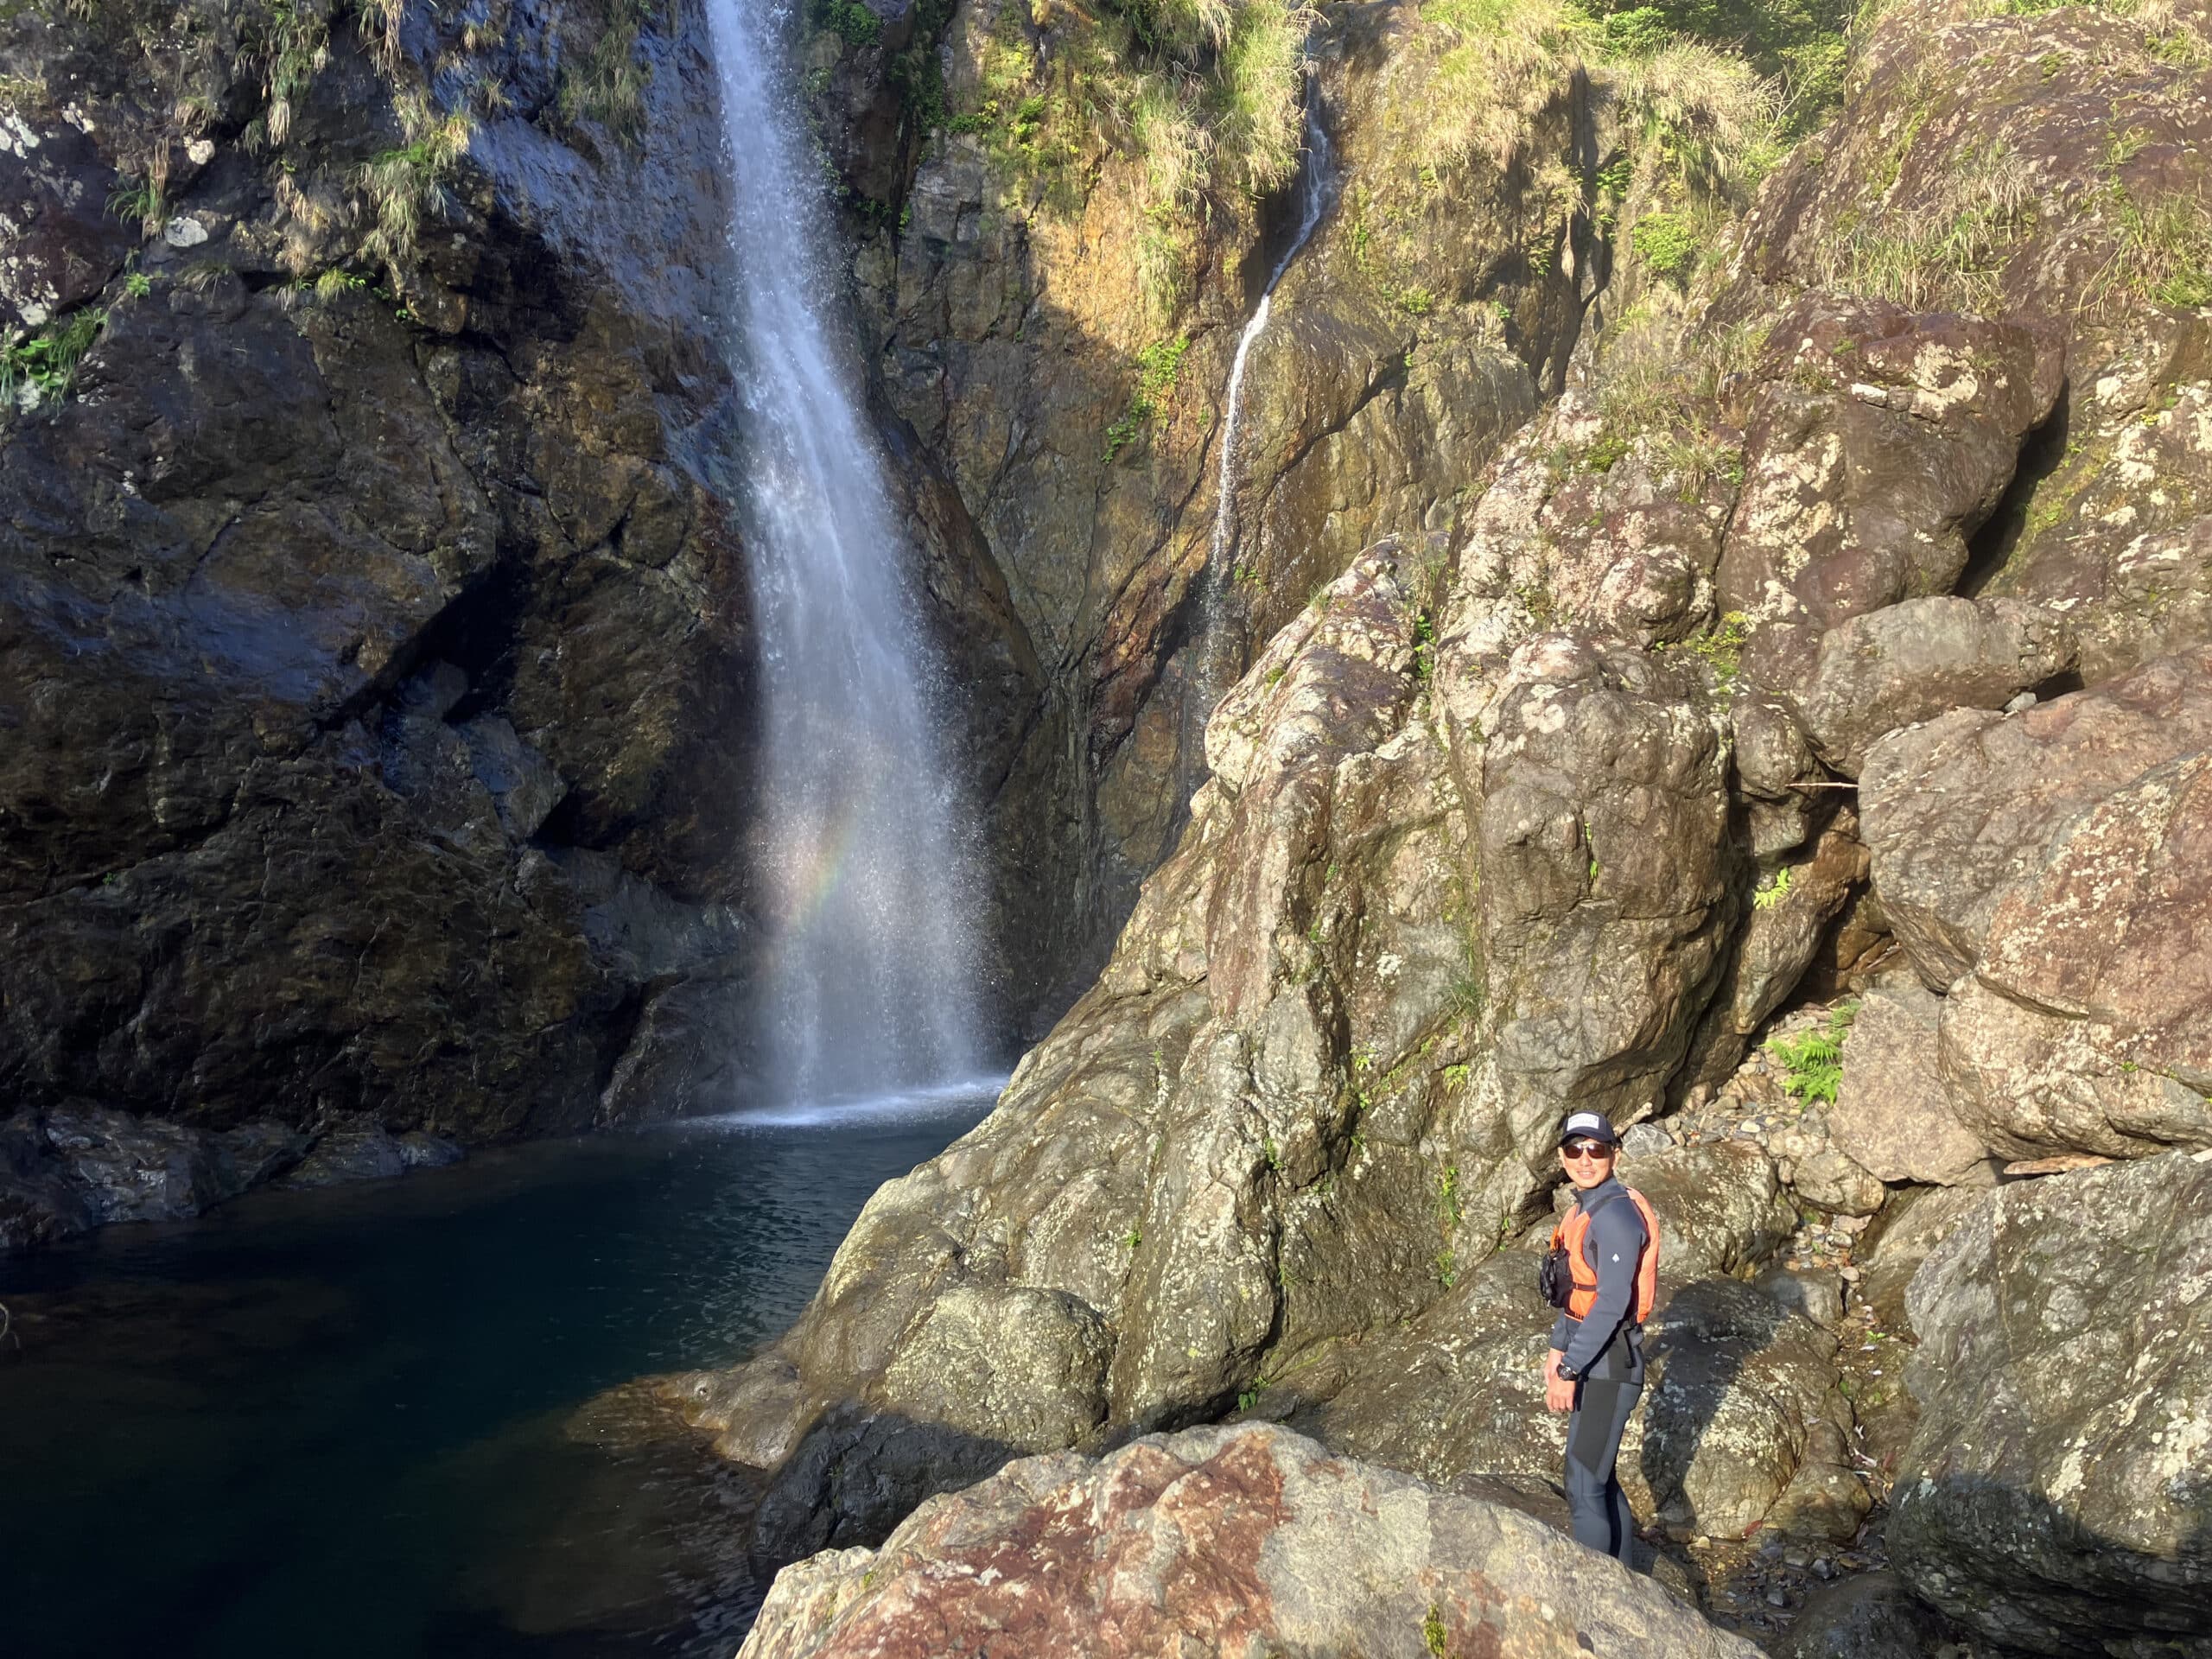 A man standing on the rocks near the waterfall.